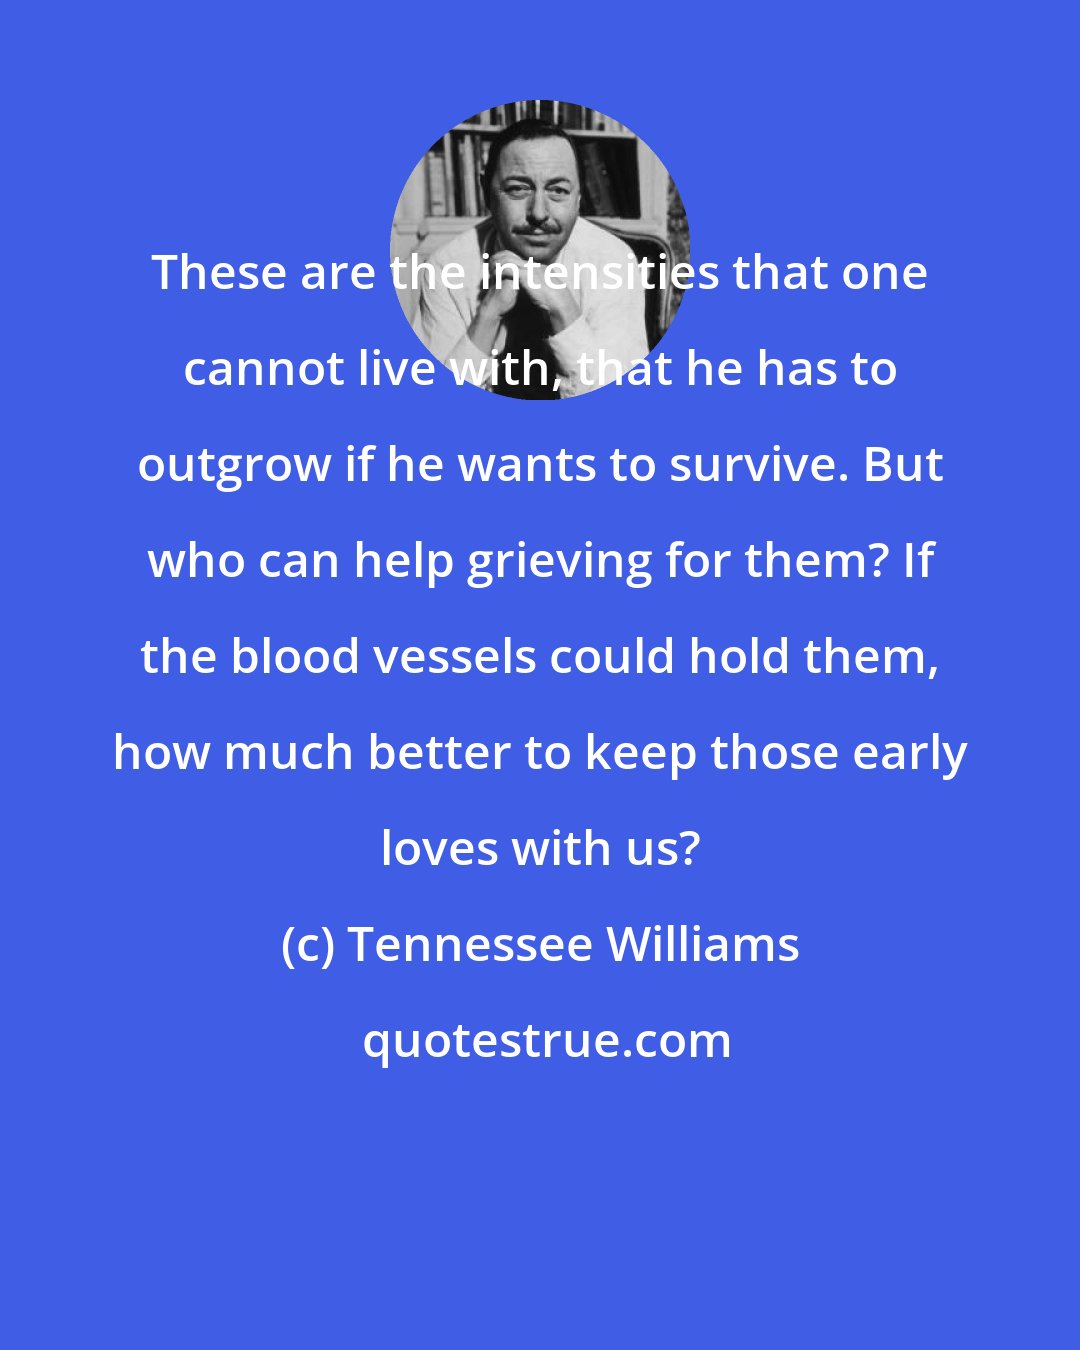 Tennessee Williams: These are the intensities that one cannot live with, that he has to outgrow if he wants to survive. But who can help grieving for them? If the blood vessels could hold them, how much better to keep those early loves with us?